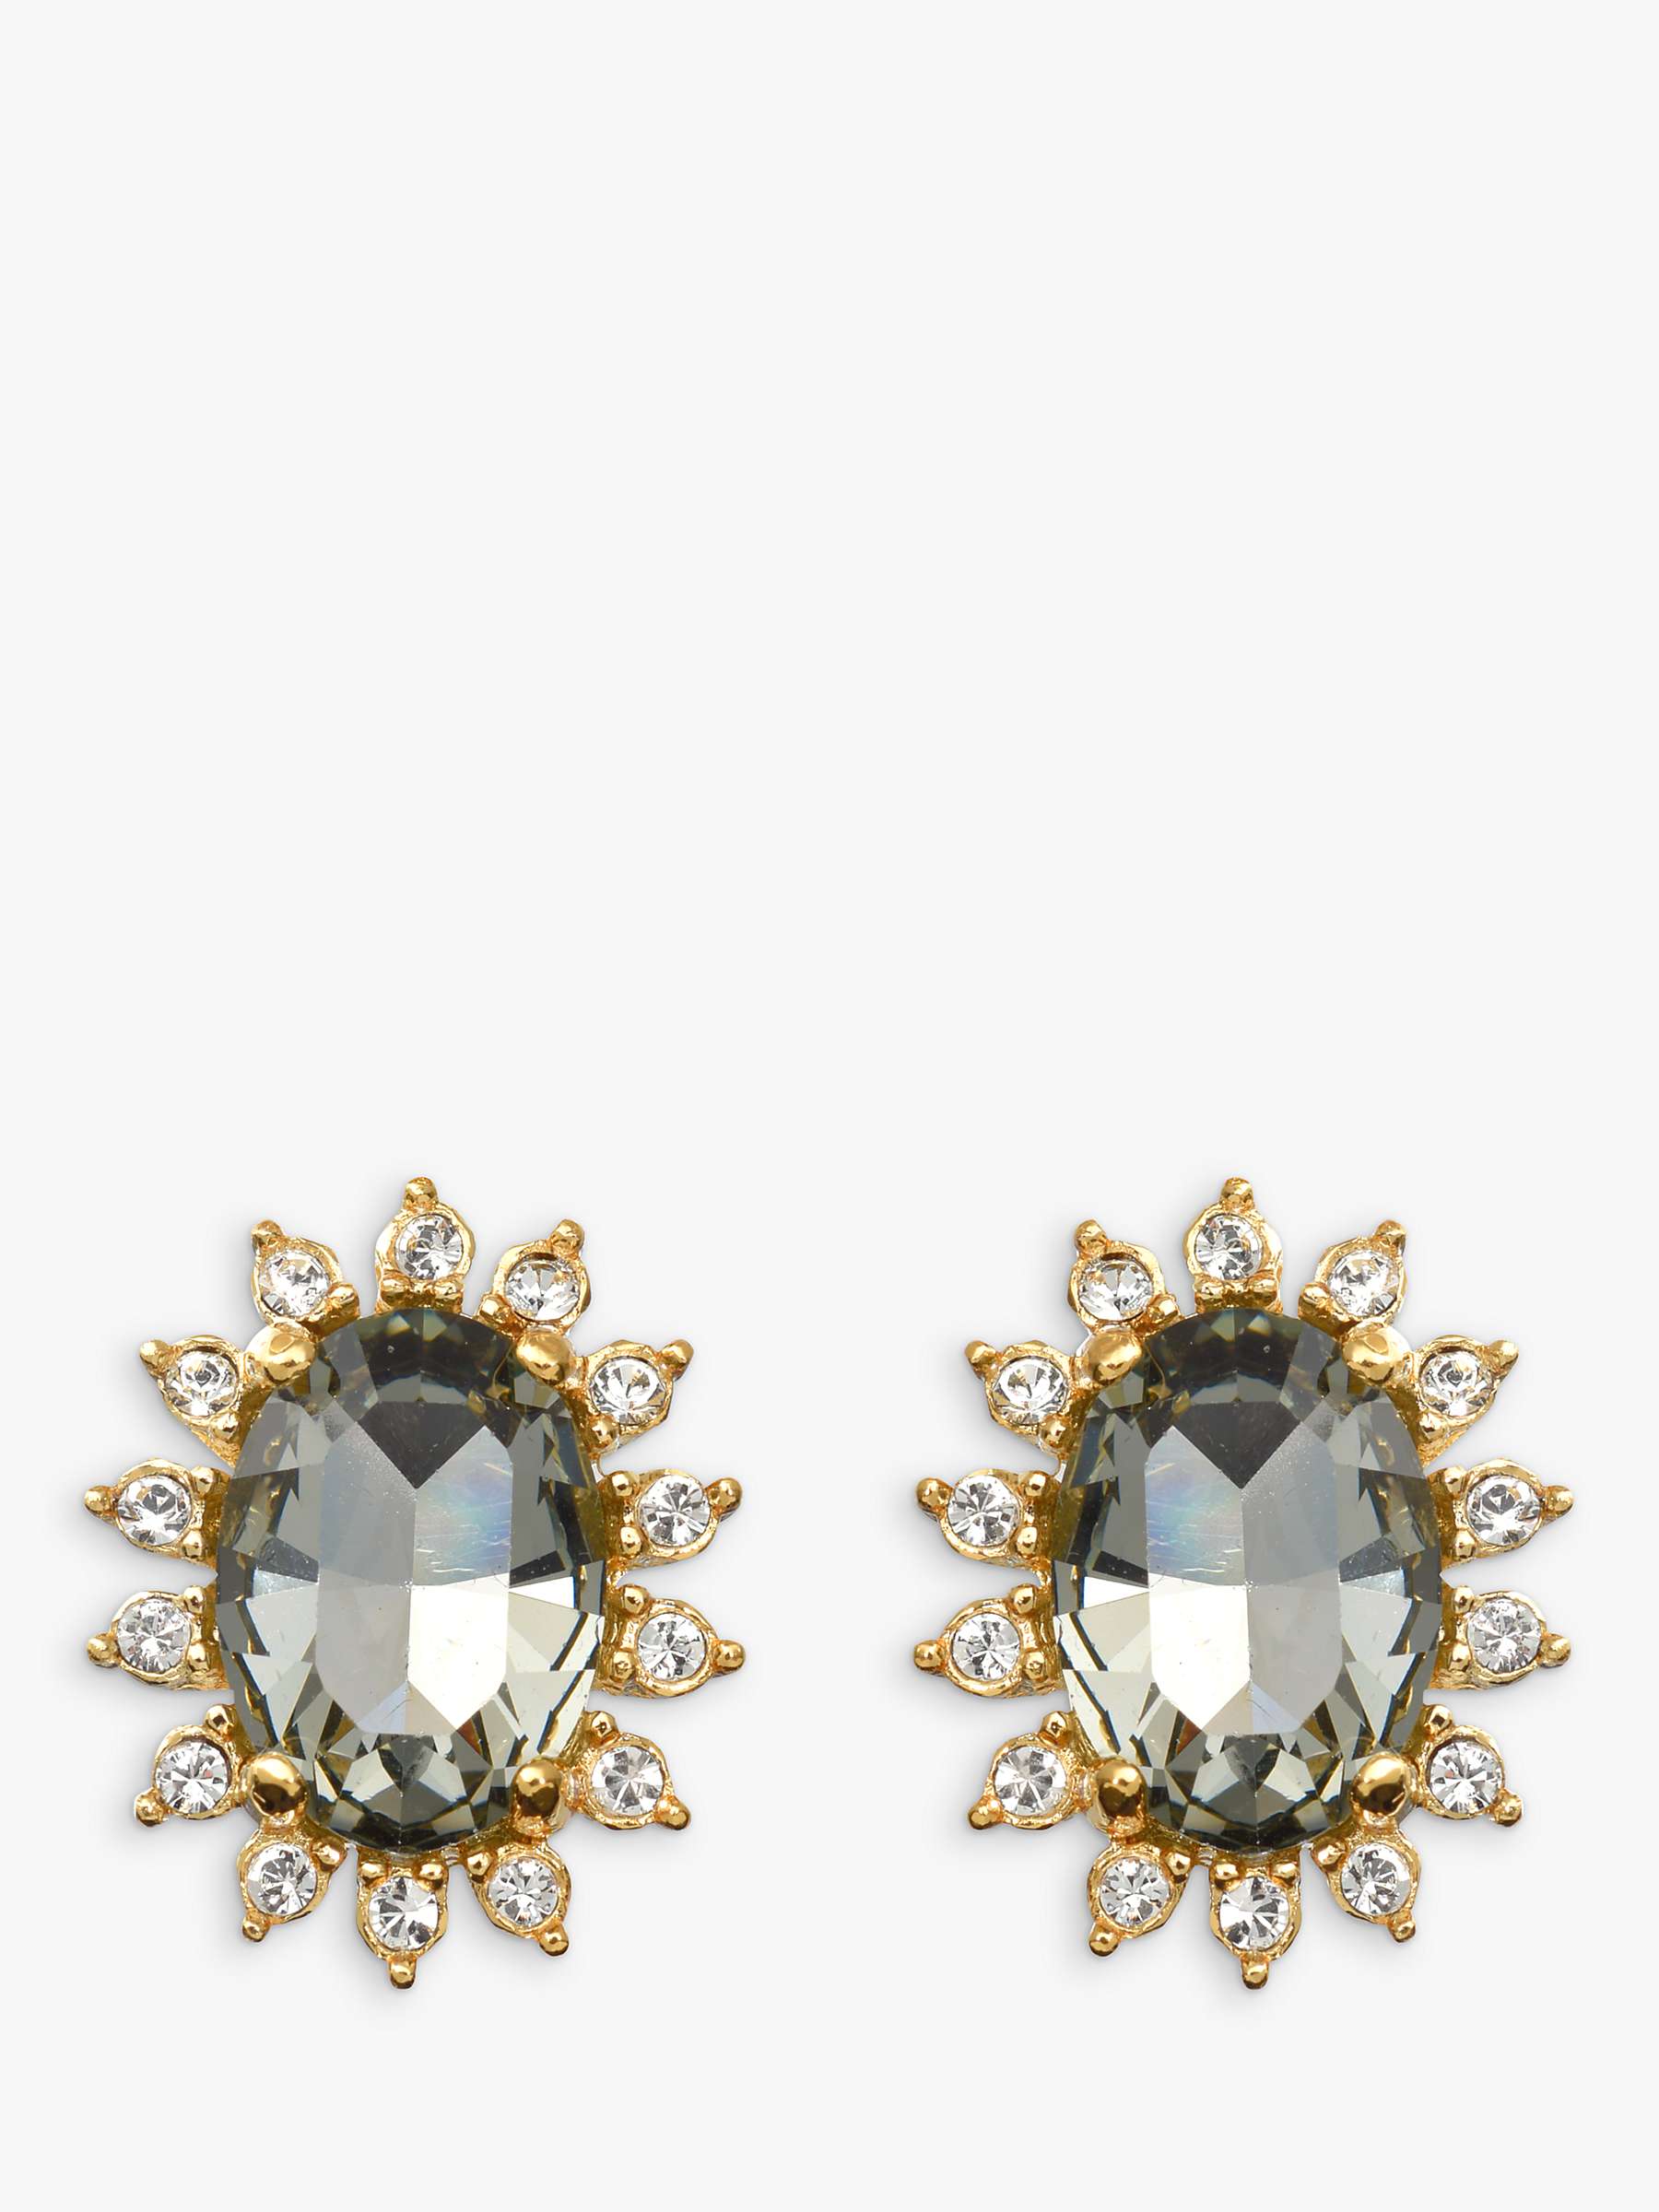 Buy Eclectica Vintage 22ct Gold Plated Swarovski Crystal Clip-On Earrings, Gold/Grey Online at johnlewis.com